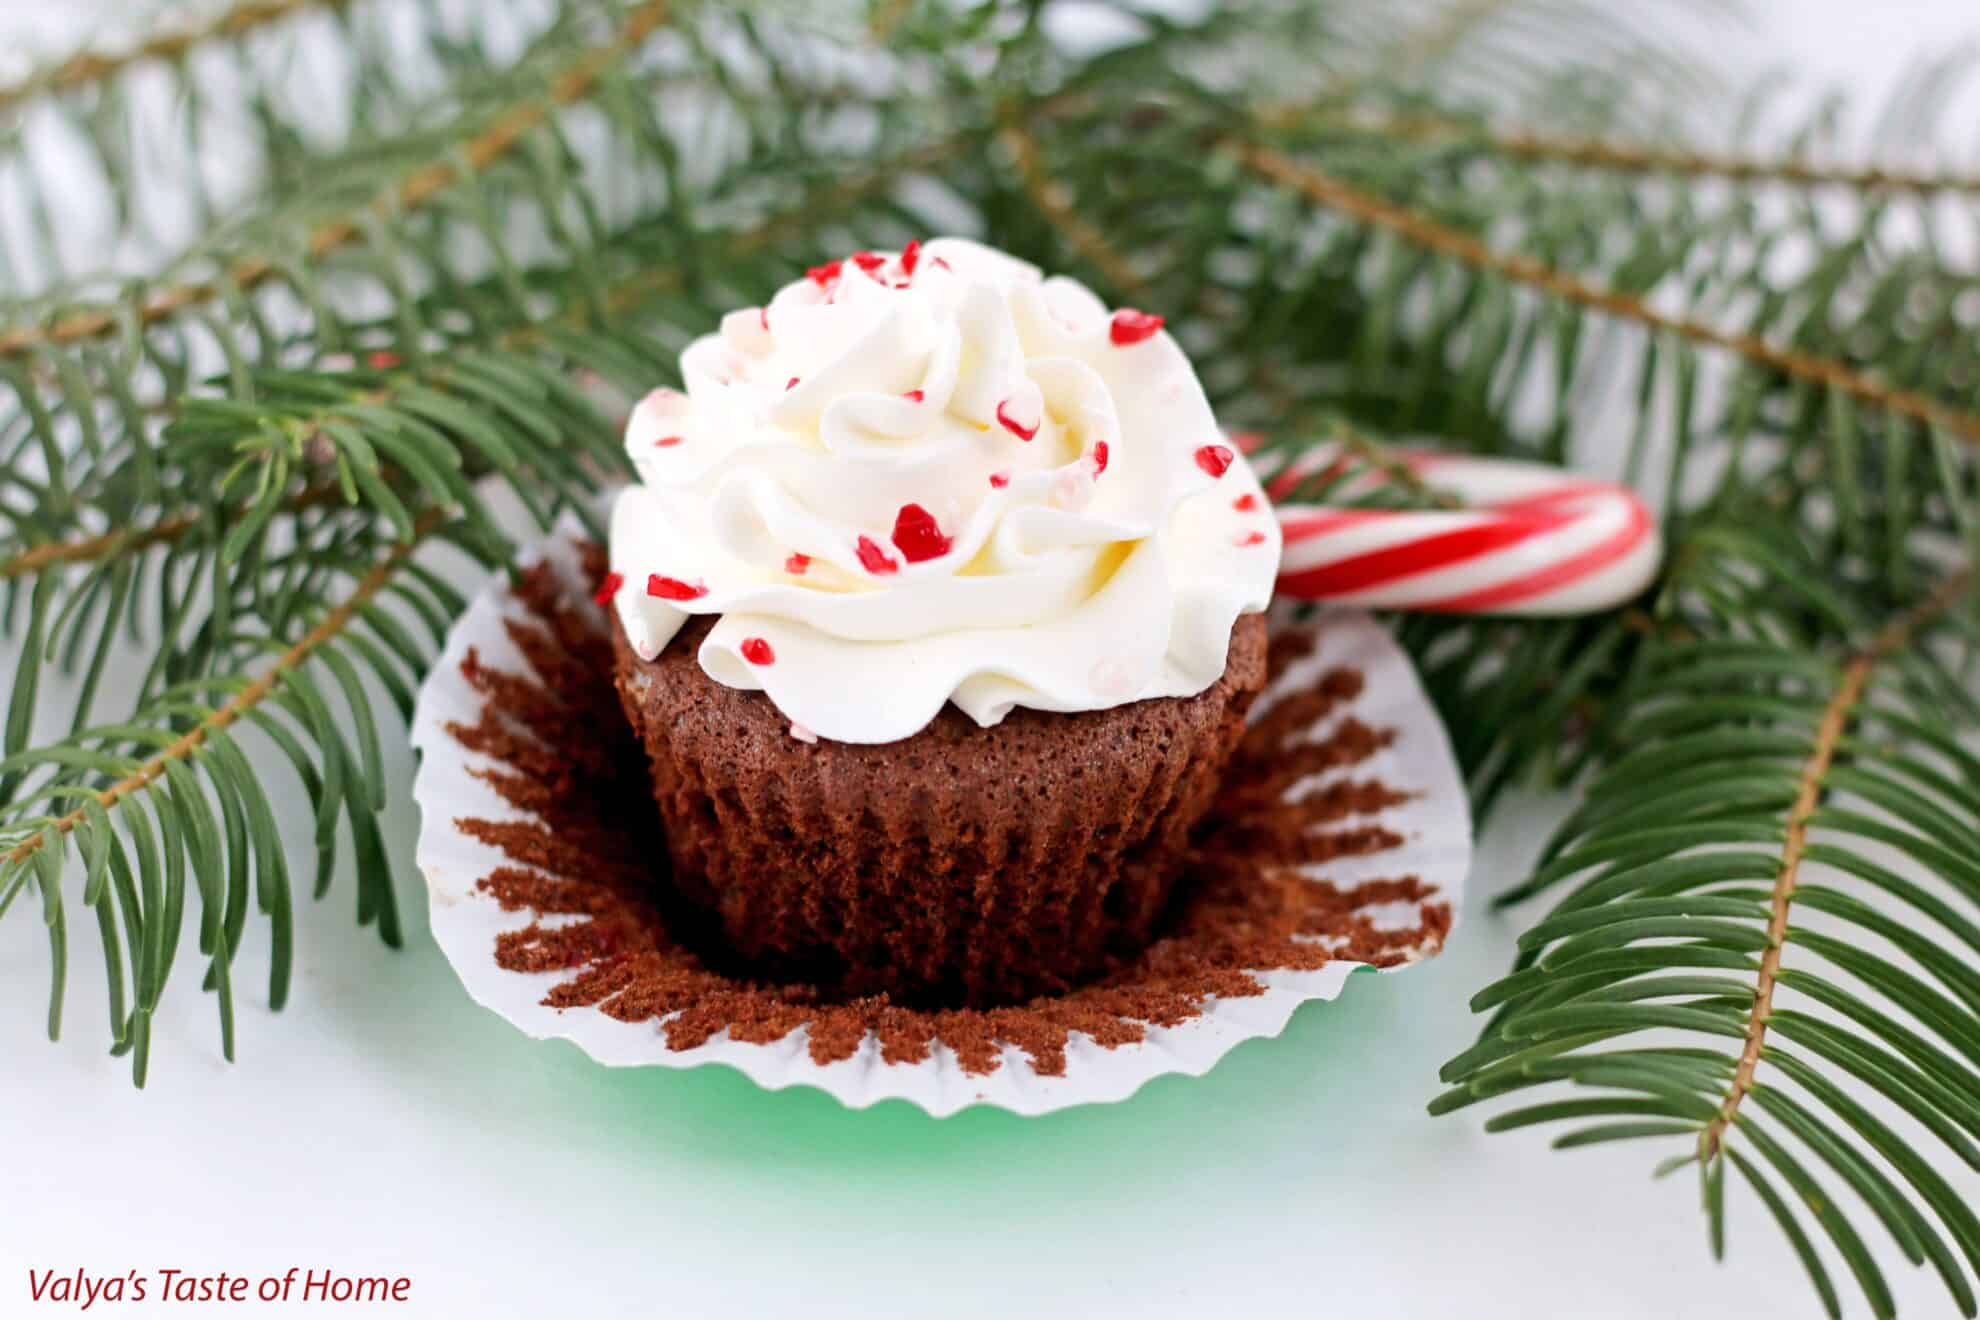 Candy Cane Honey Chocolate Cupcakes + Giveaway